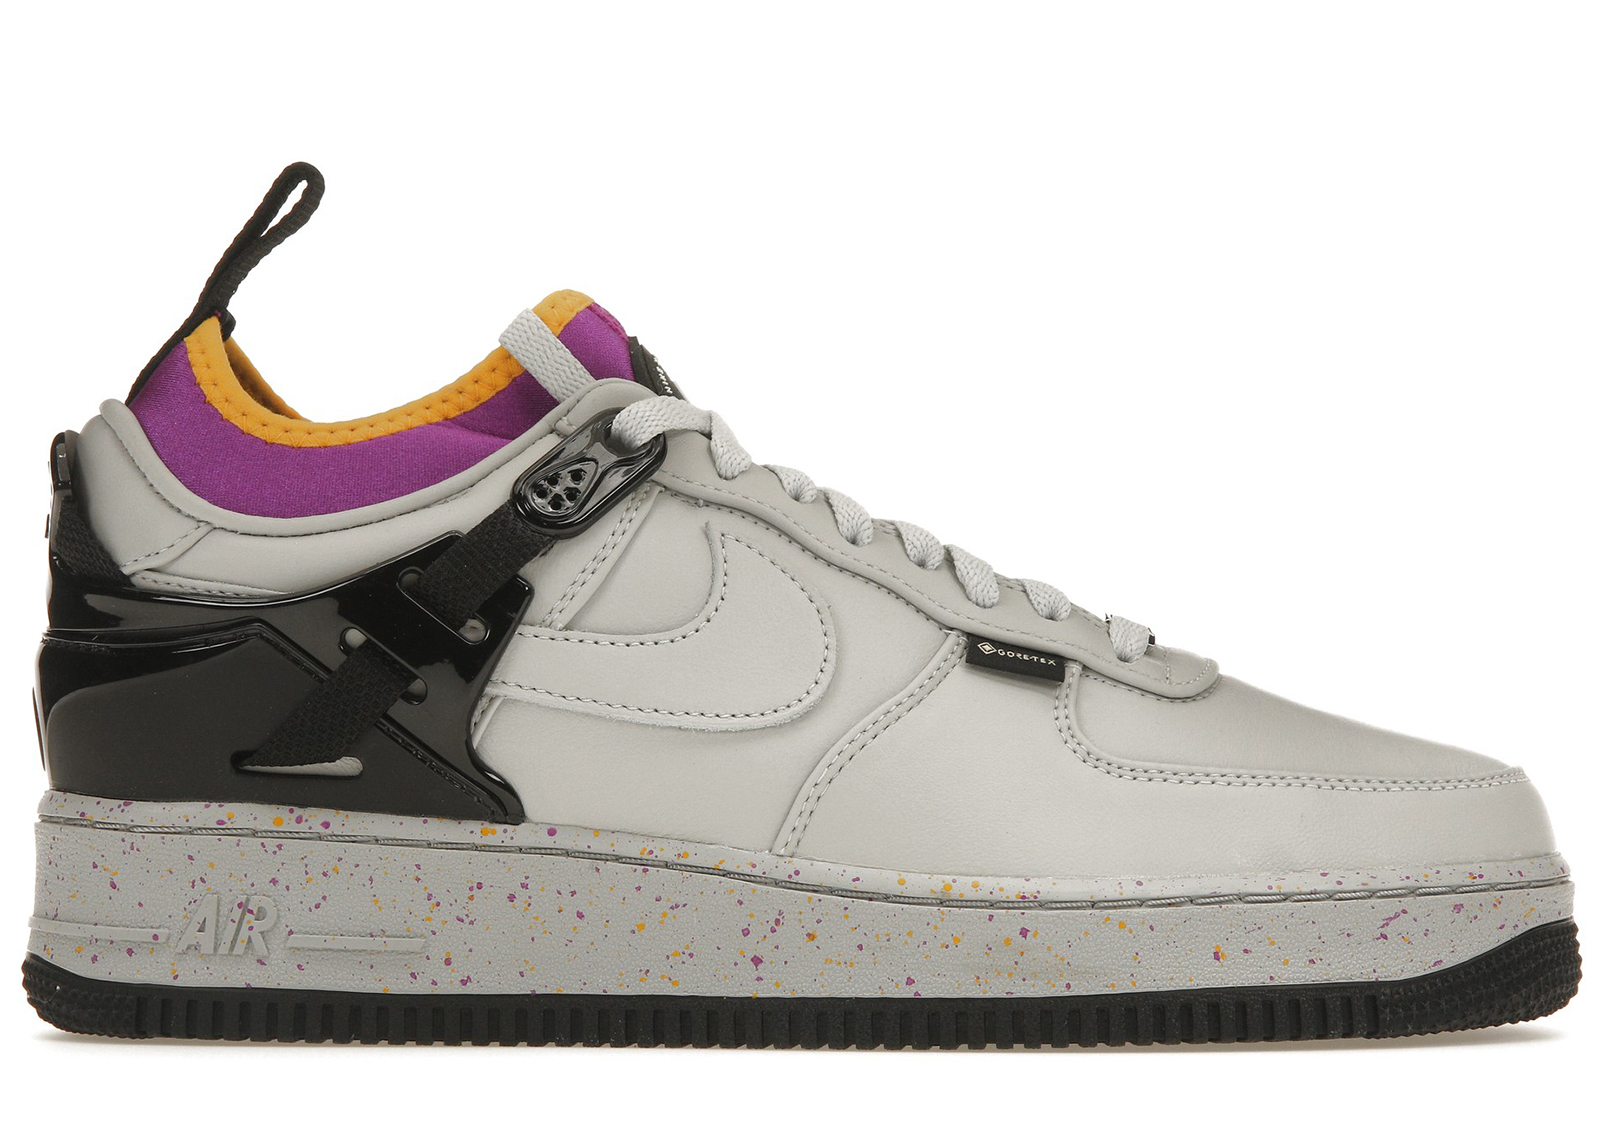 Nike Air Force 1 Low SP Undercover Grey Fog Men's - DQ7558-001 - US